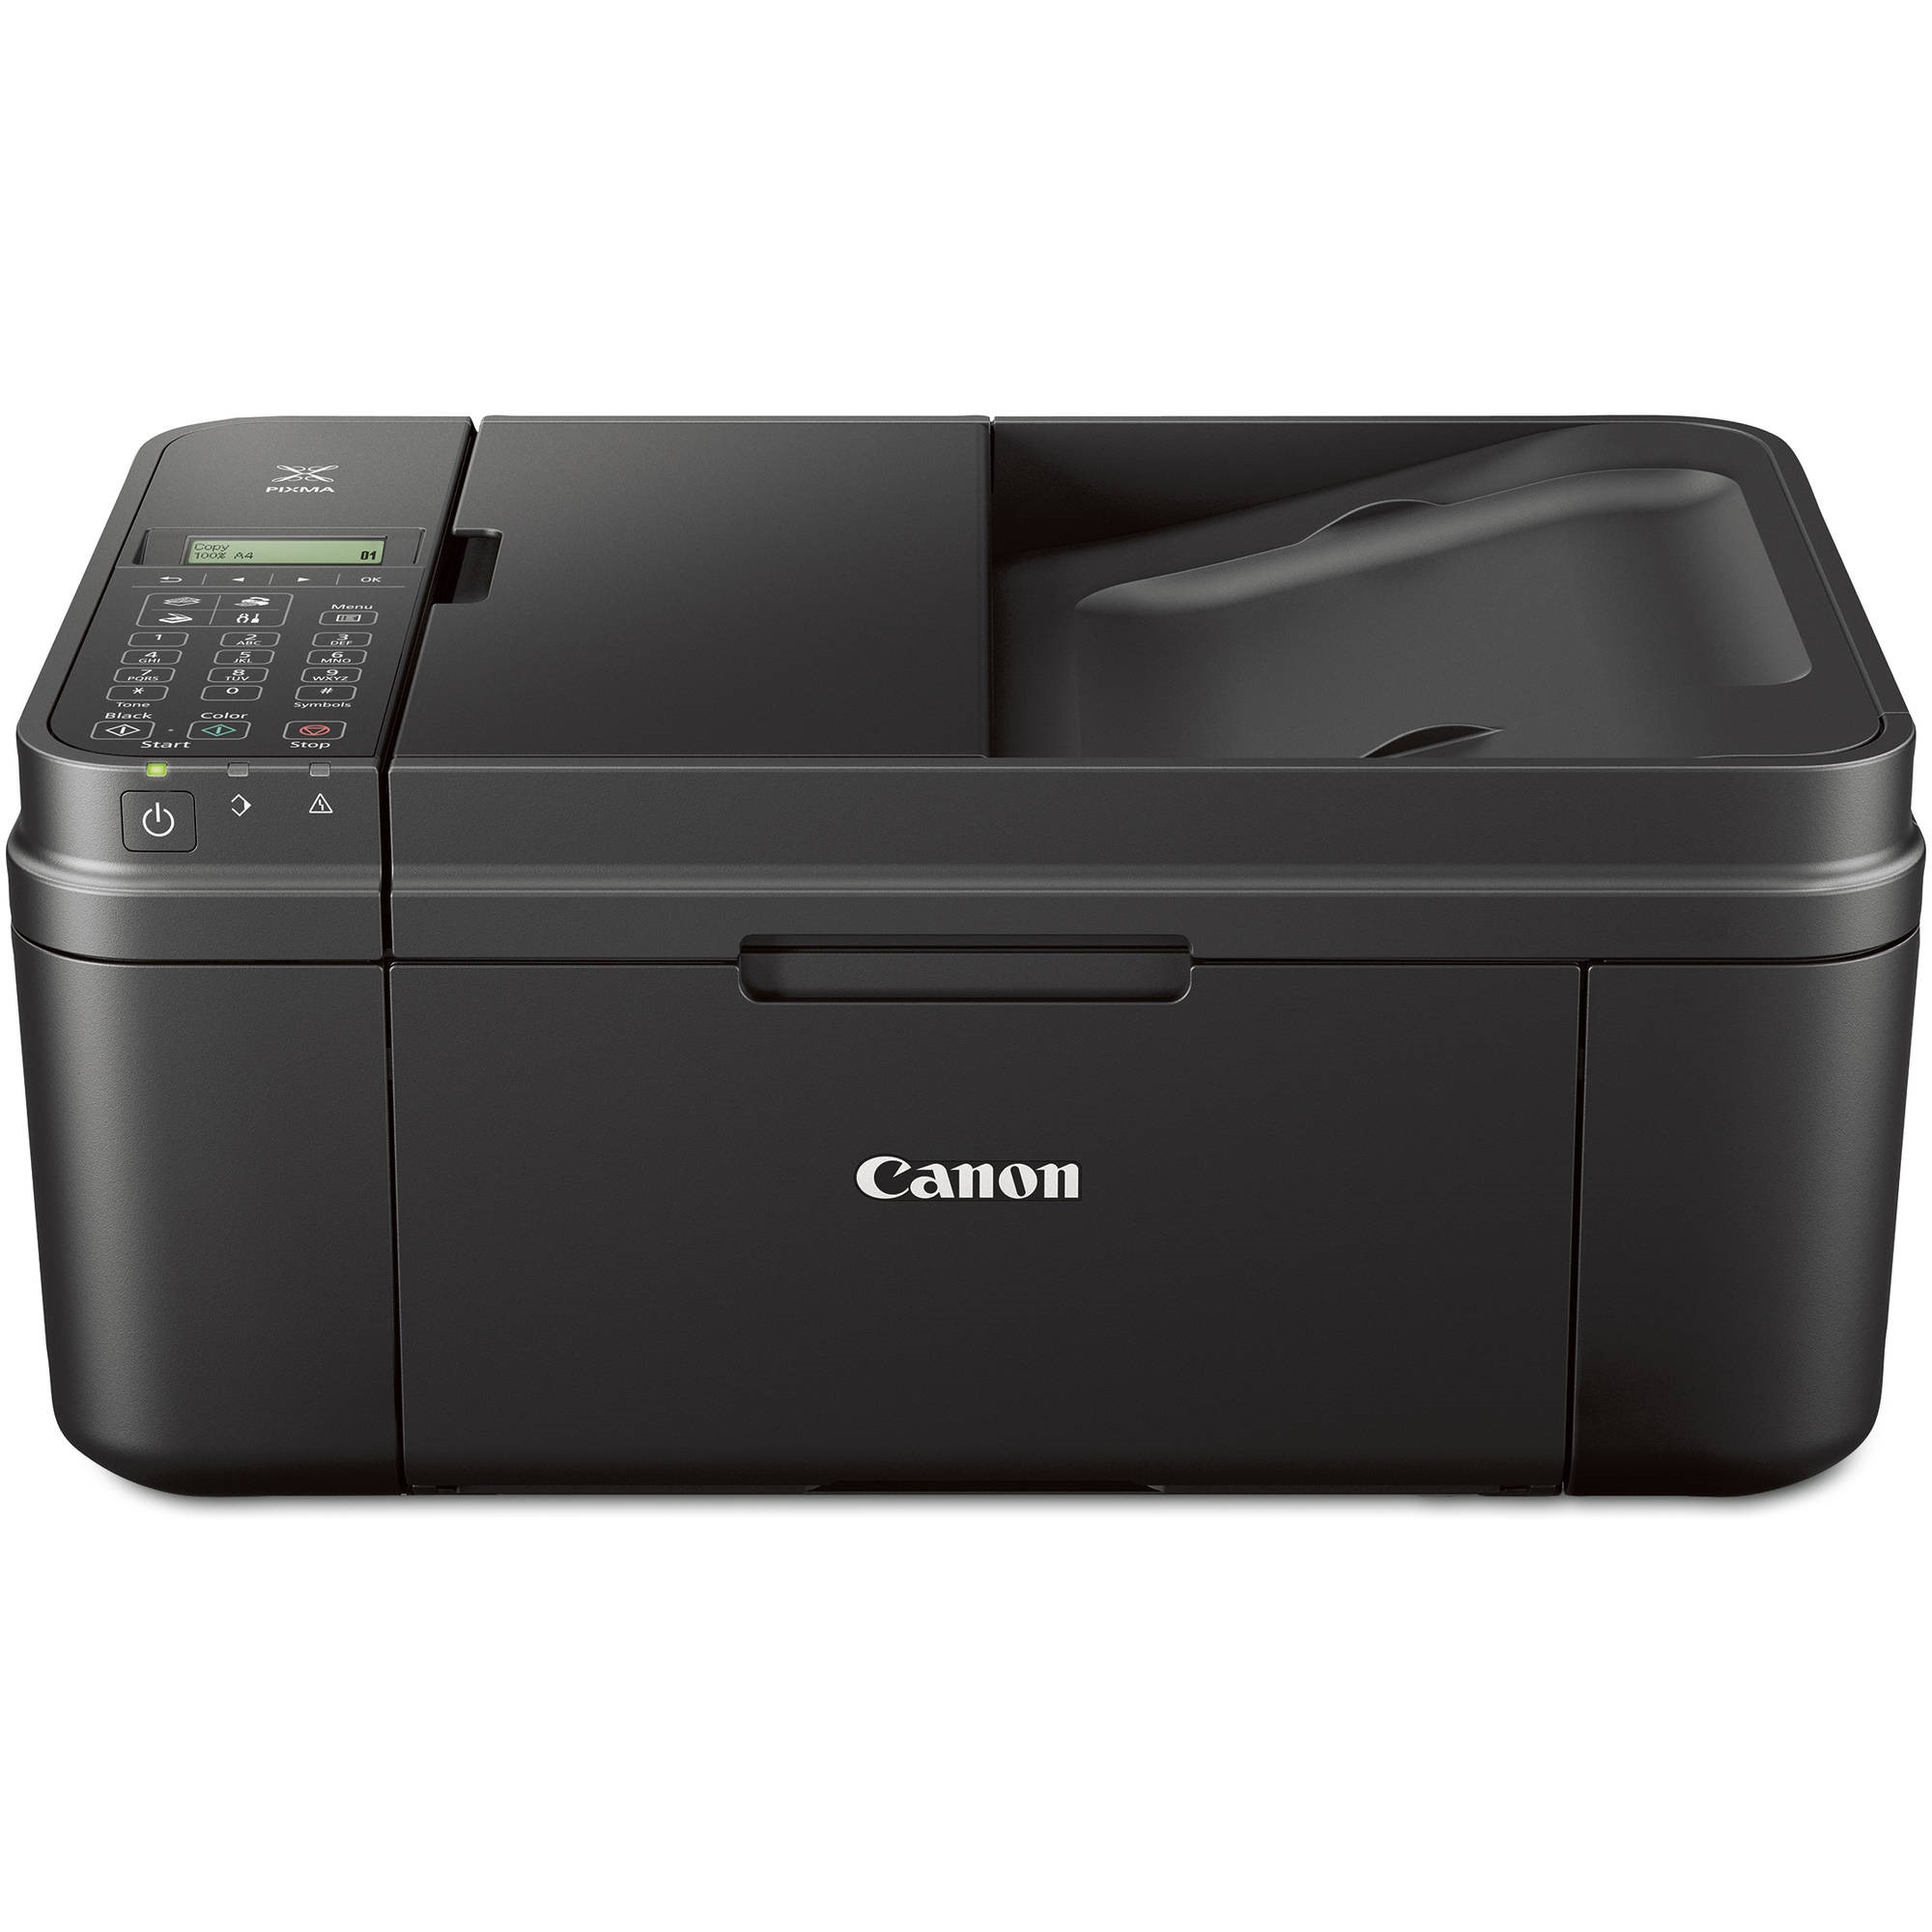 Canon PIXMA MX490 Wireless Office All-in-One Inkjet Printer/Copier/Scanner/Fax Machine - image 1 of 5